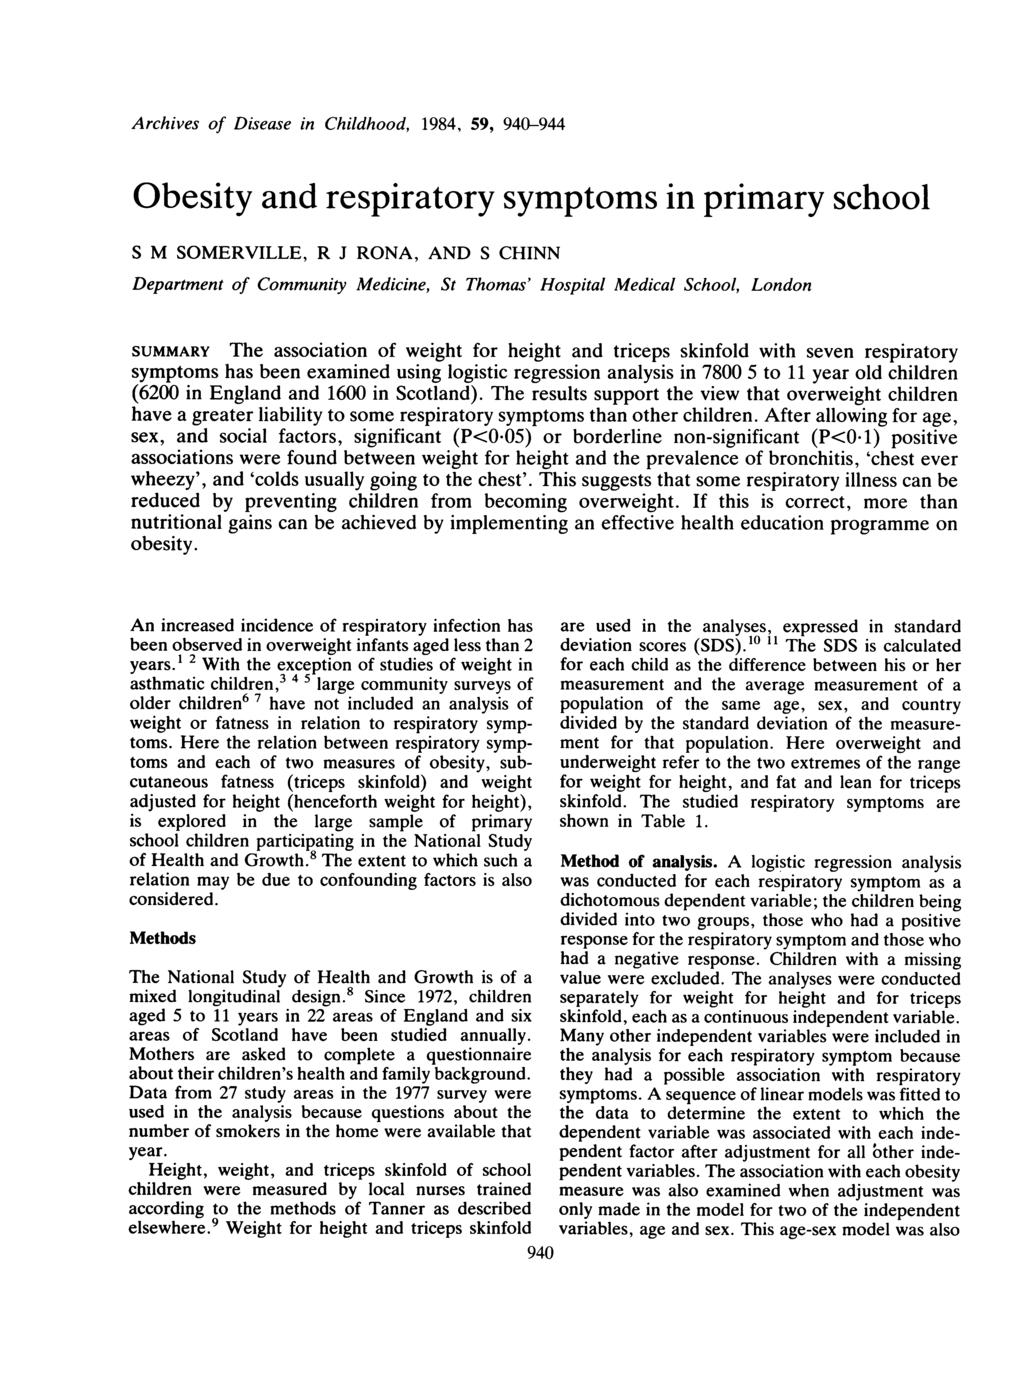 Archives of Disease in Childhood, 1984, 59, 940-944 Obesity and respiratory symptoms in primary school S M SOMERVILLE, R J RONA, AND S CHINN Department of Community Medicine, St Thomas' Hospital